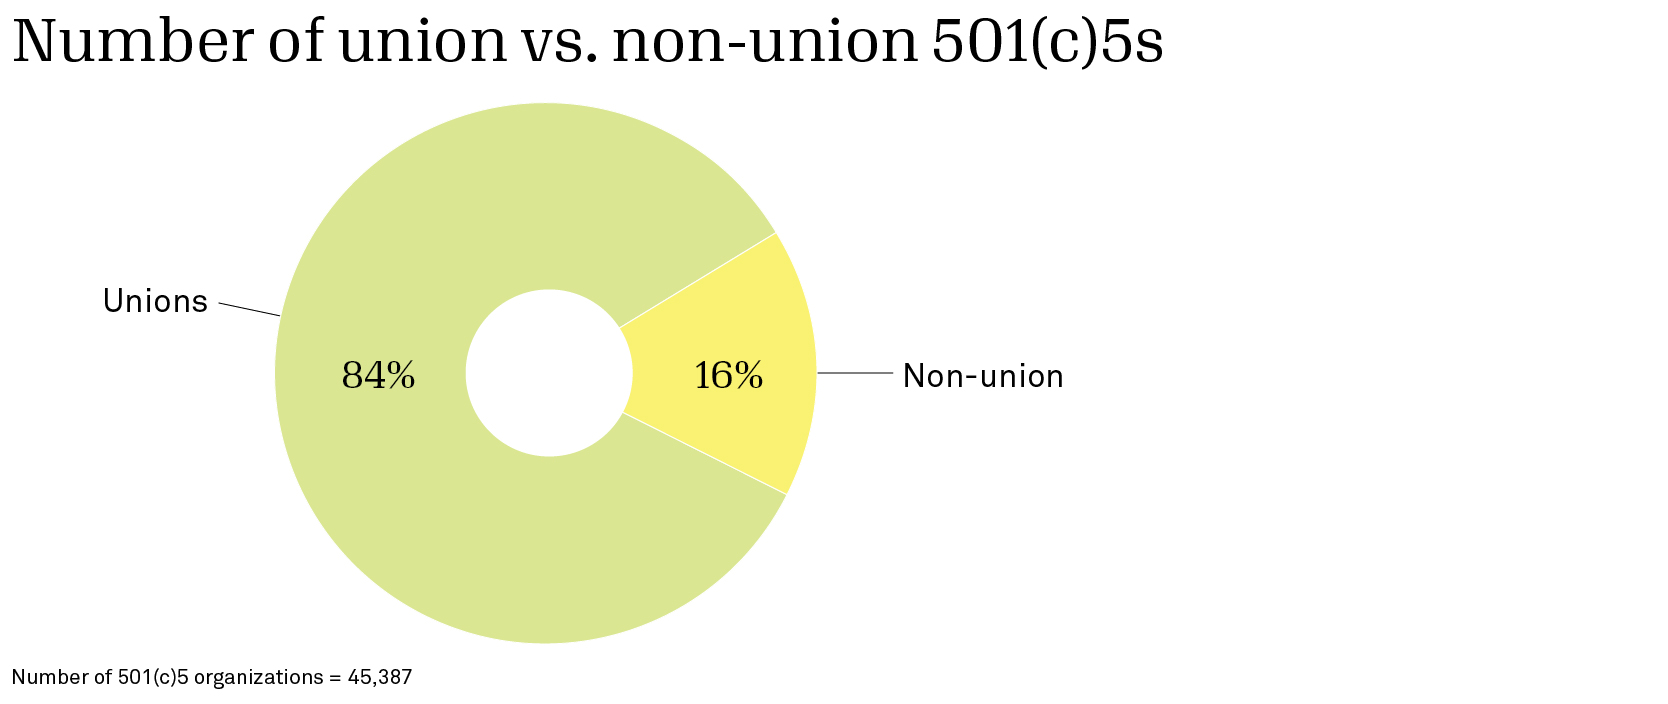 Pie chart showing the number of union vs non-union 501(c)5 organizations